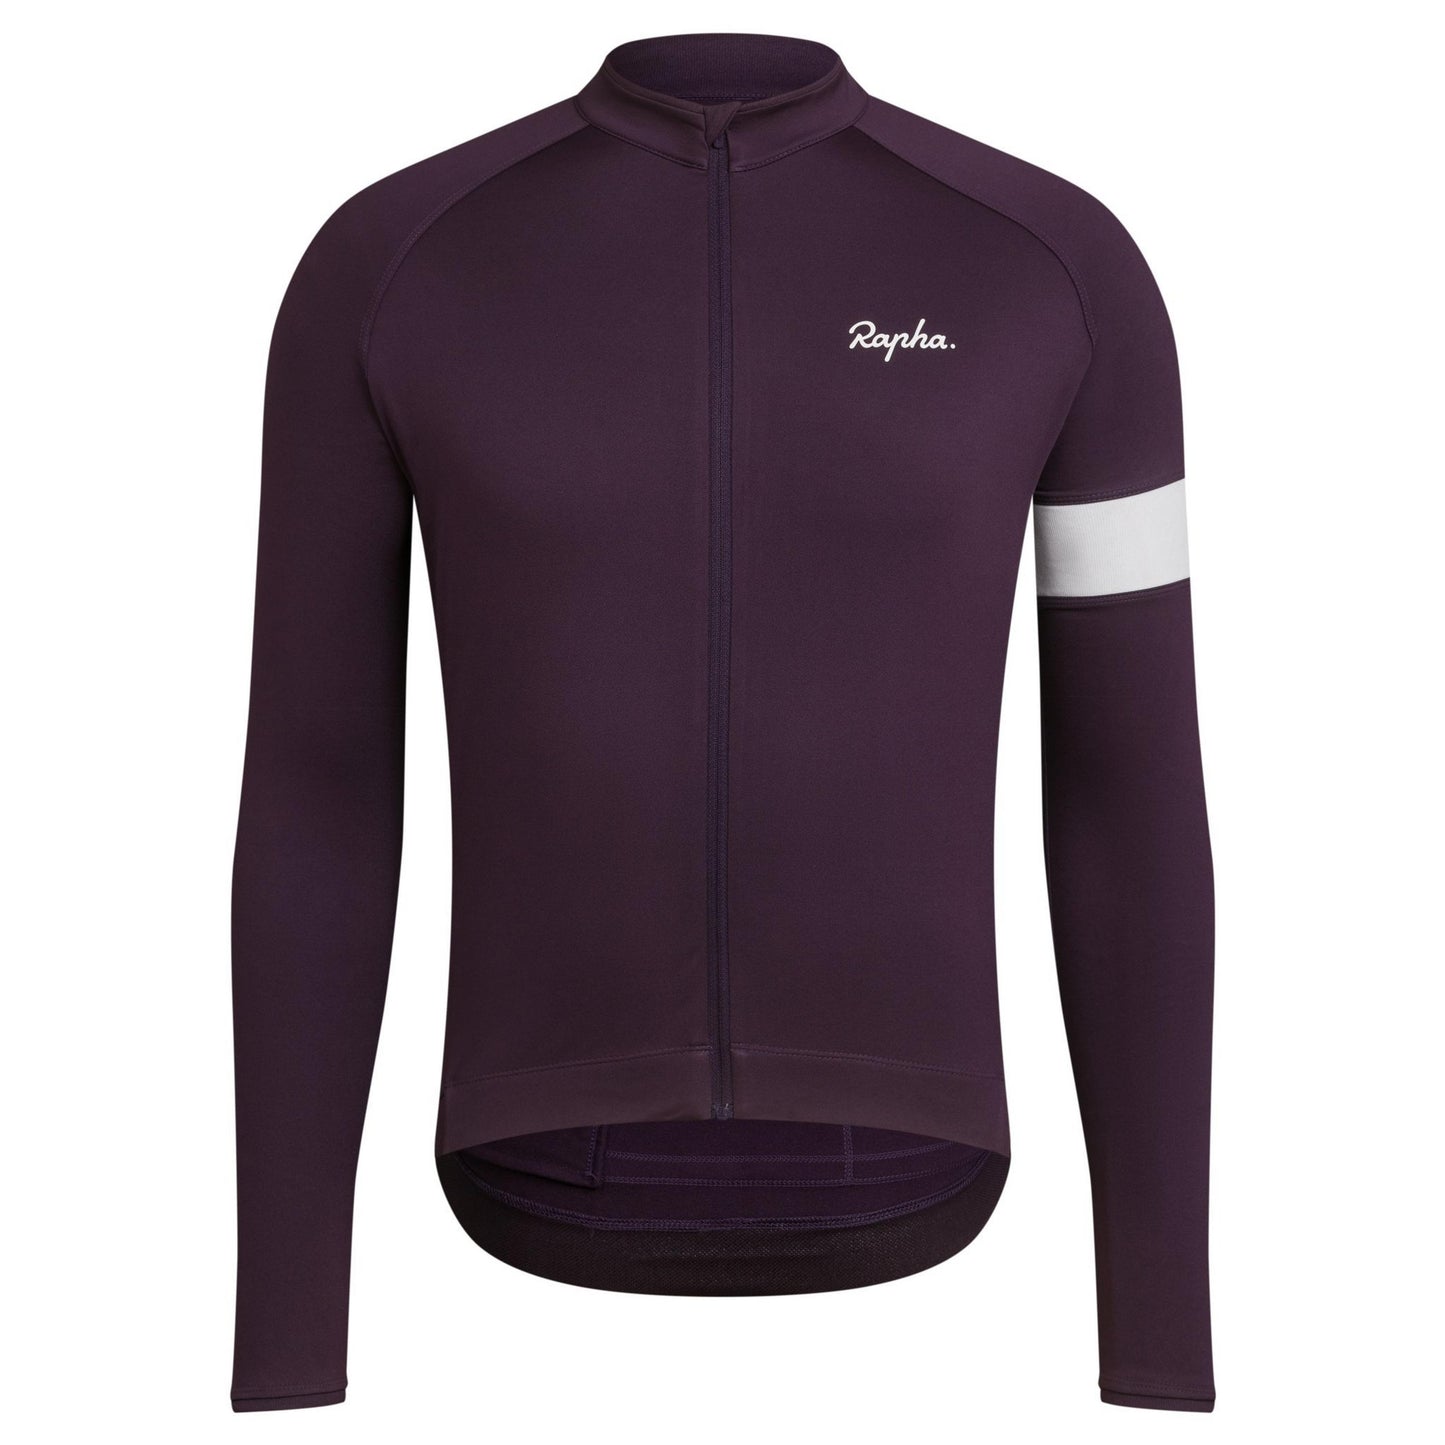 Rapha Men's Long Sleeve Core Jersey - Purple/White buy at Woolys Wheels bicycle store Sydney with free delivery